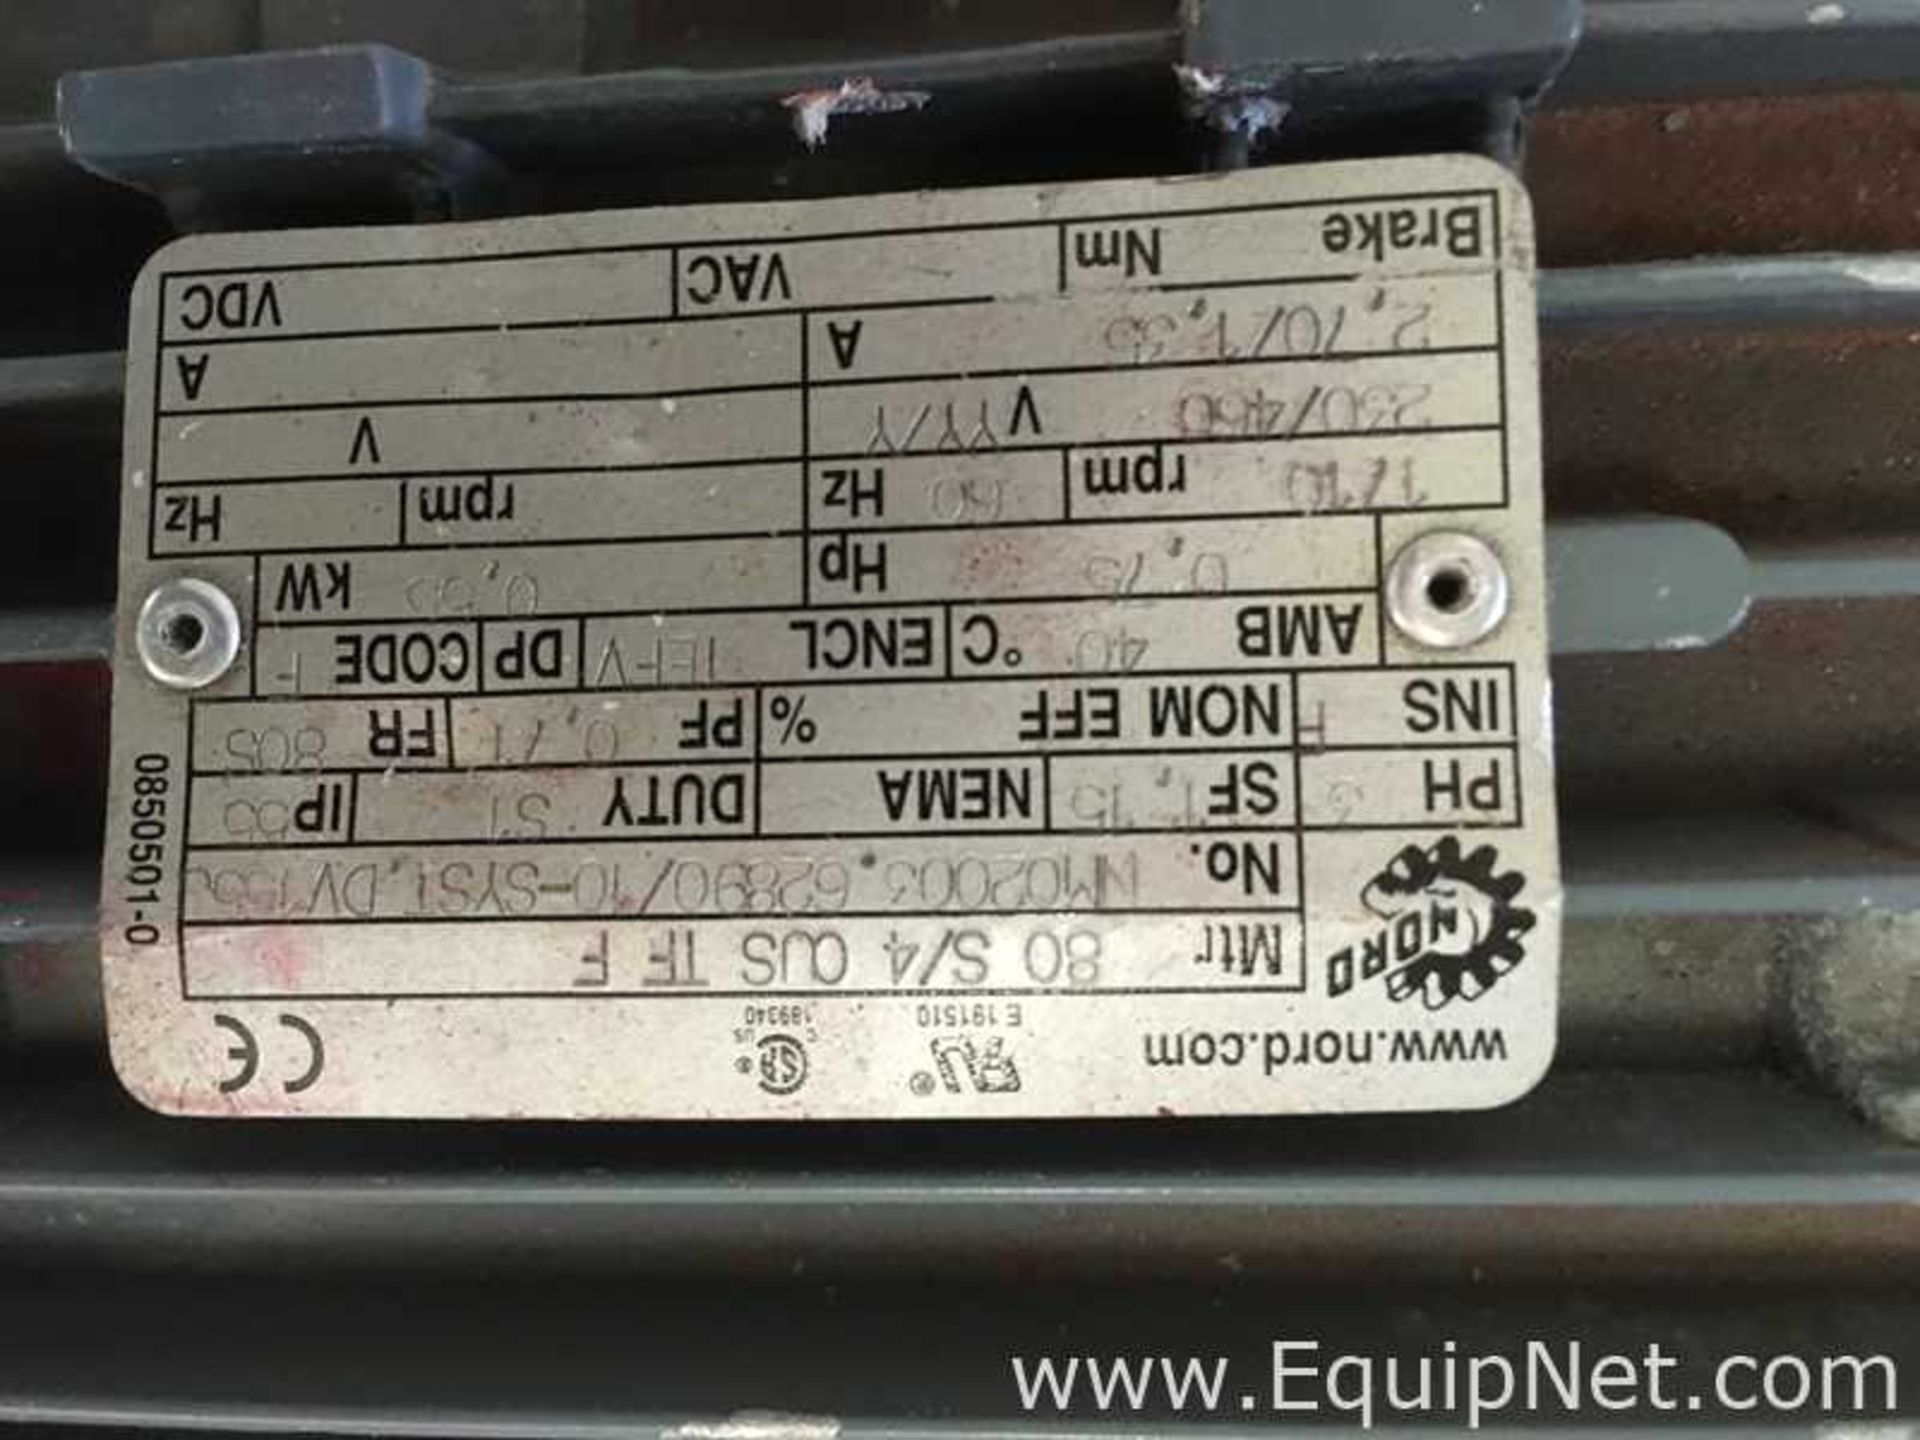 EQUIPNET LISTING #601009; REMOVAL COST: $0; DESCRIPTION: Nord 0.75 HP Electric Motor - Image 4 of 4